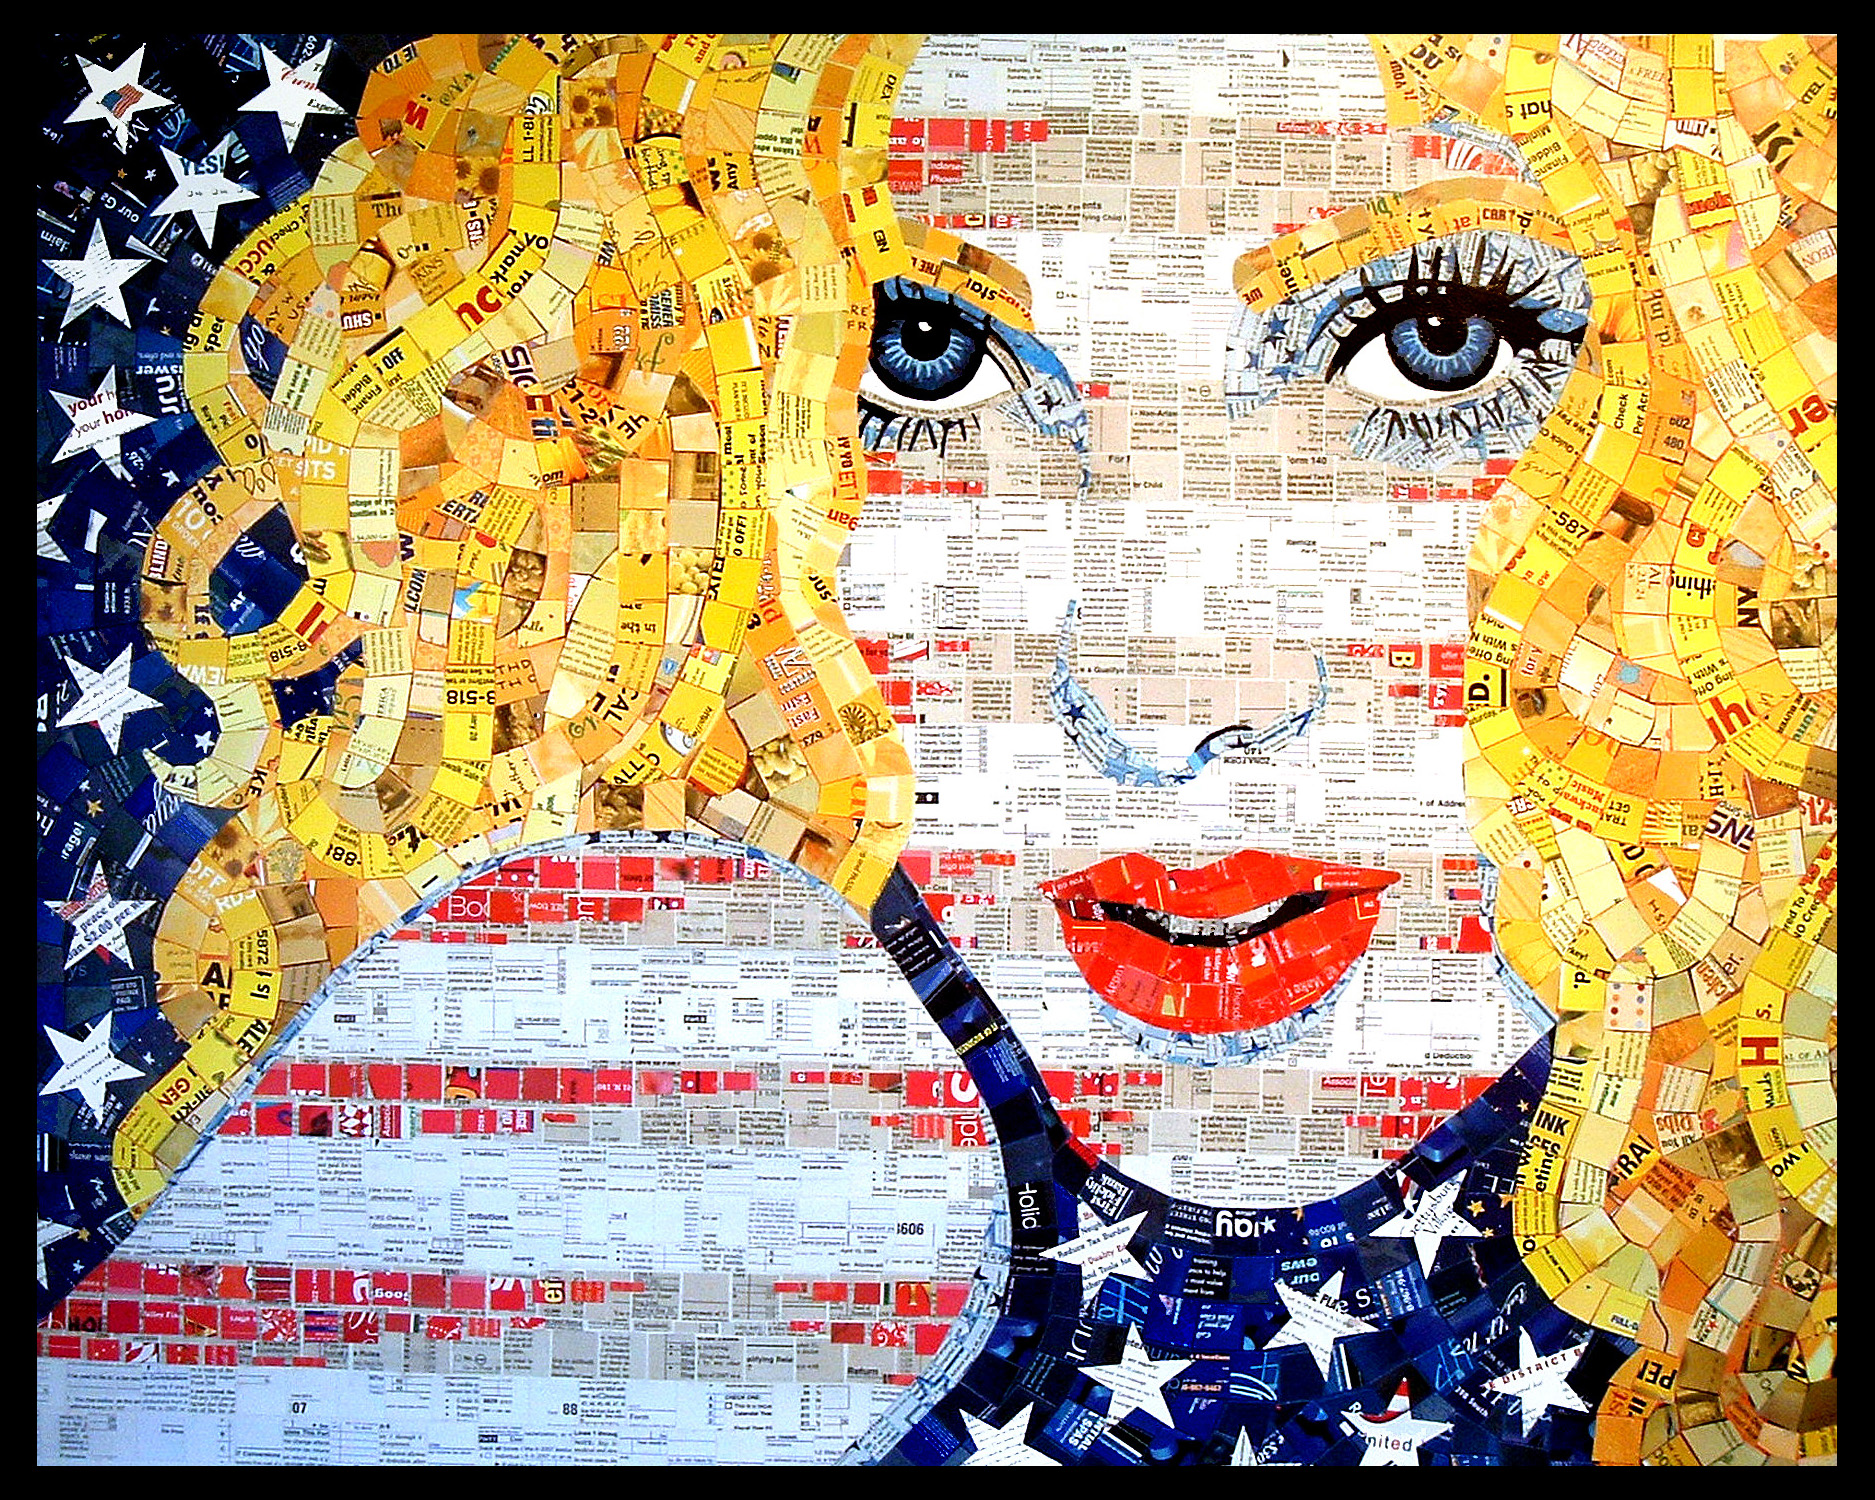 Recycled Art Created from Junk Mail Makes Fine Art Pop